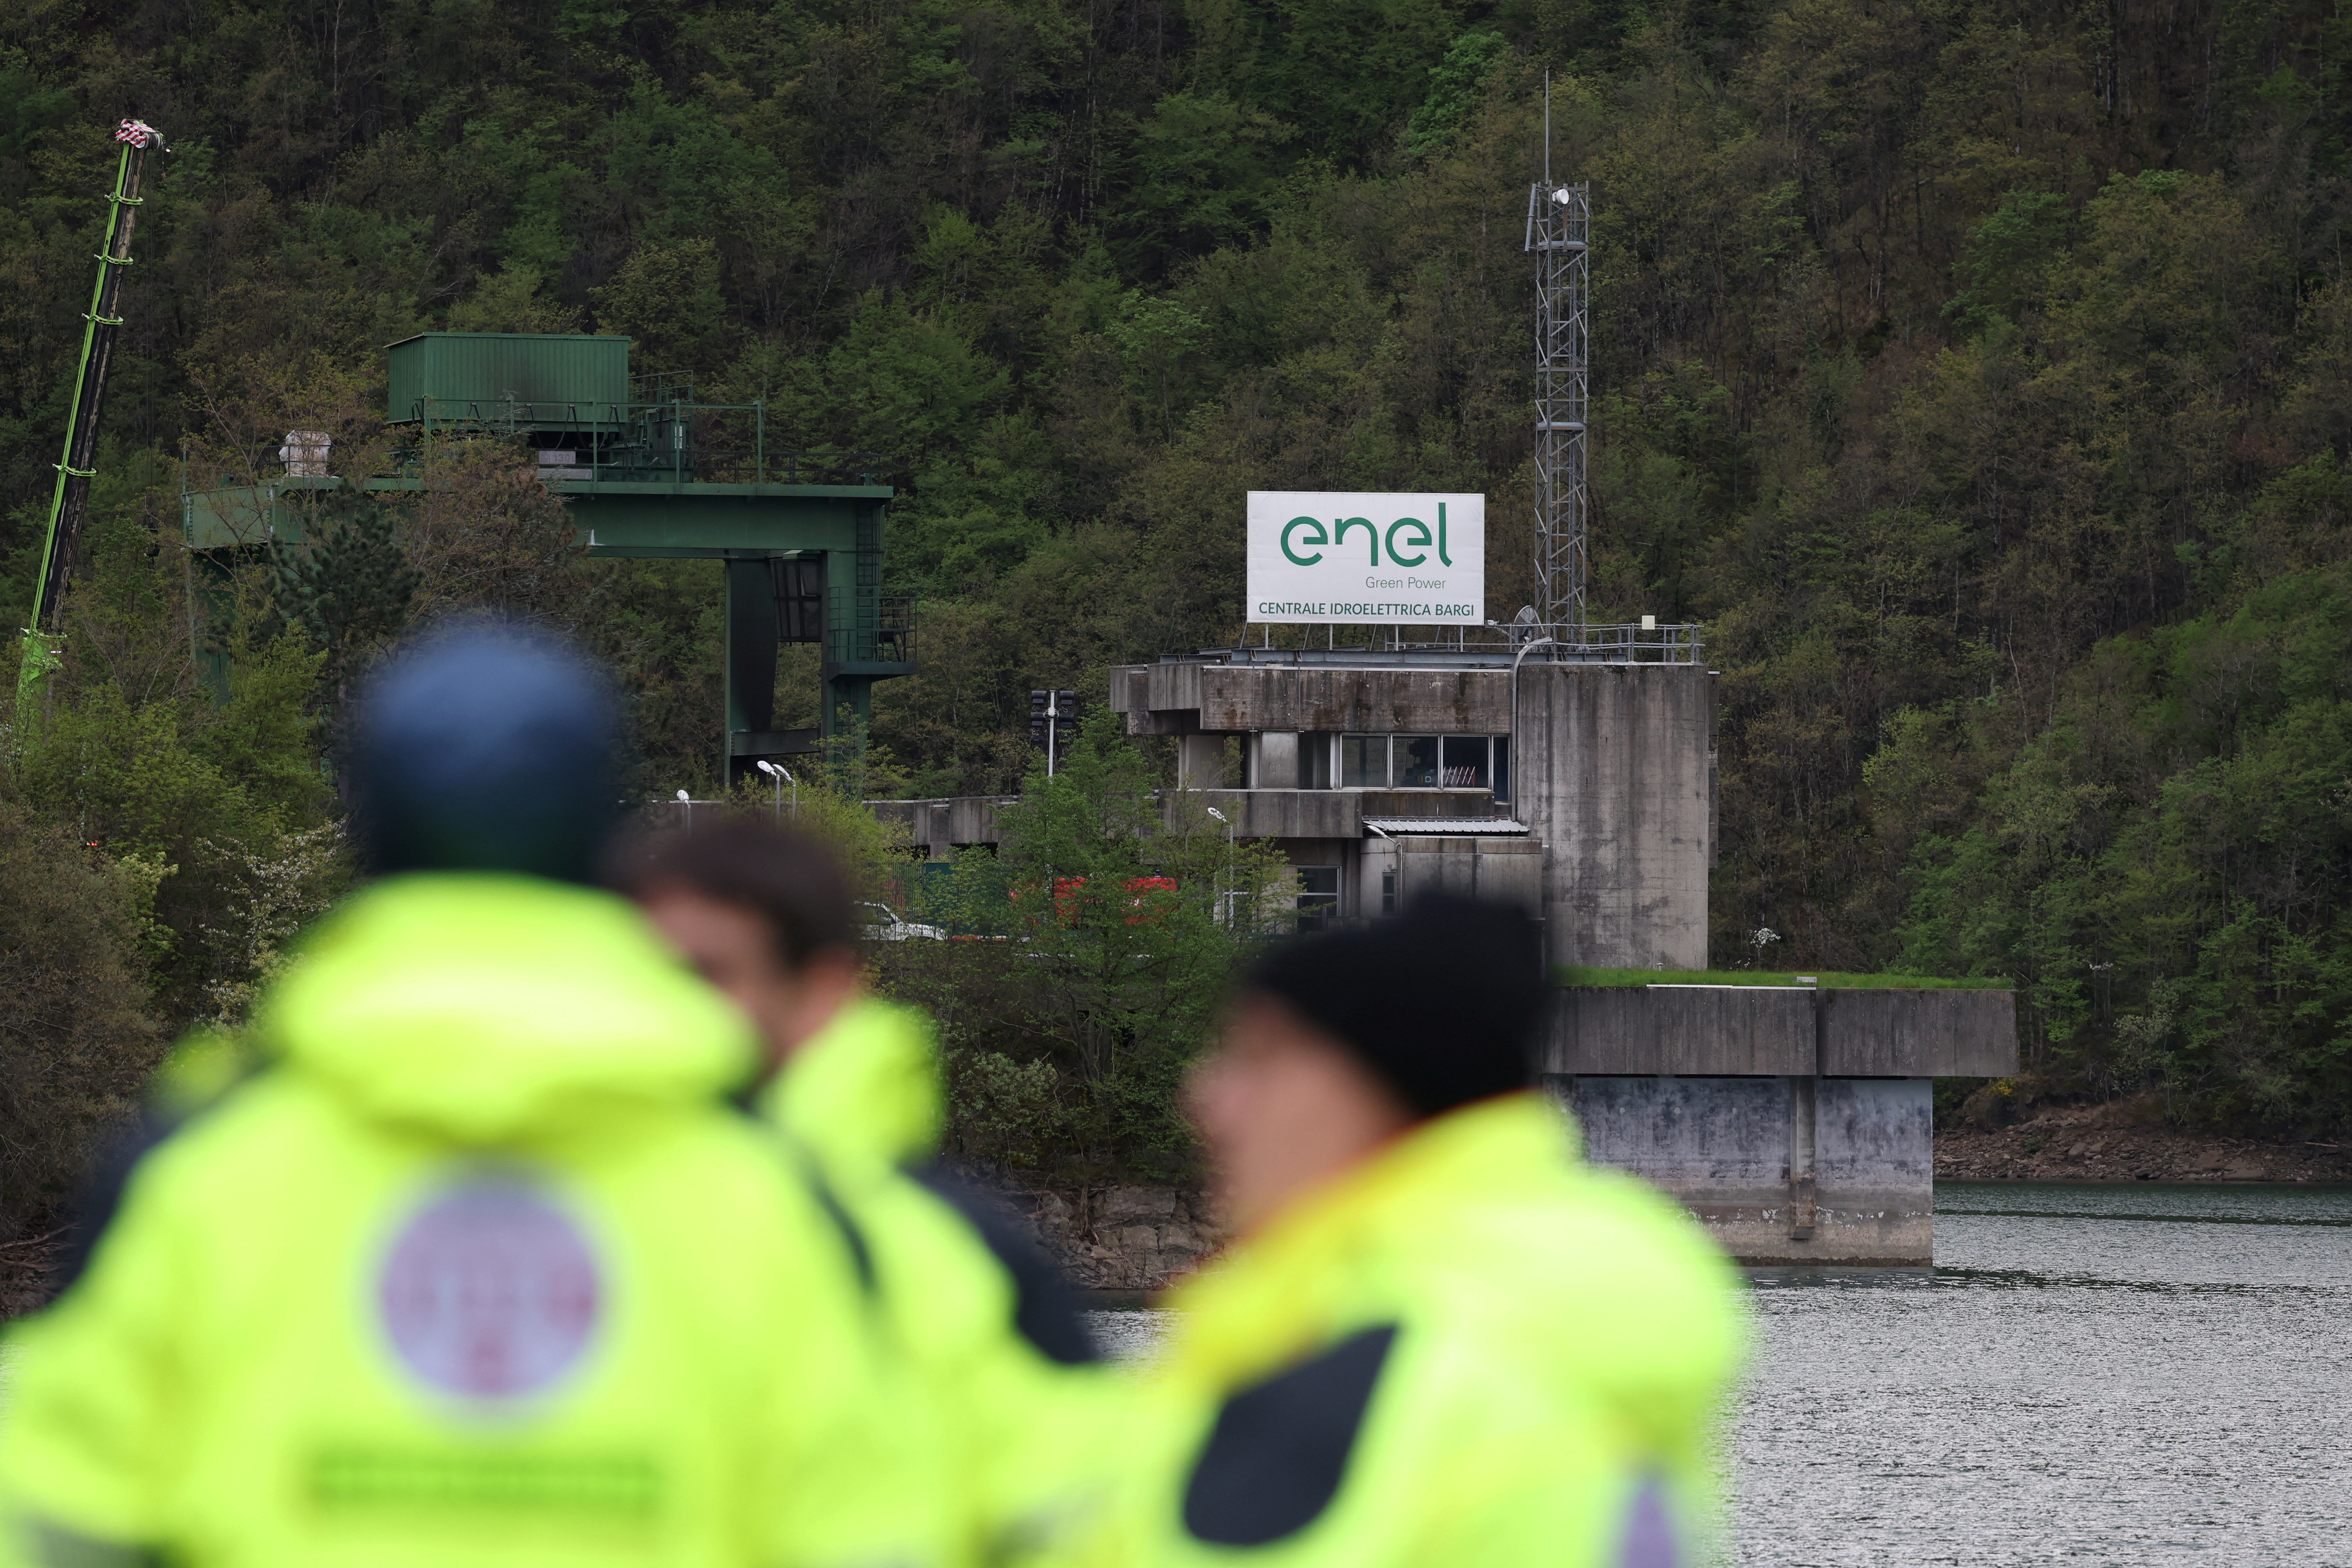 Aftermath of a blast at Enel hydroelectric power plant in Bargi